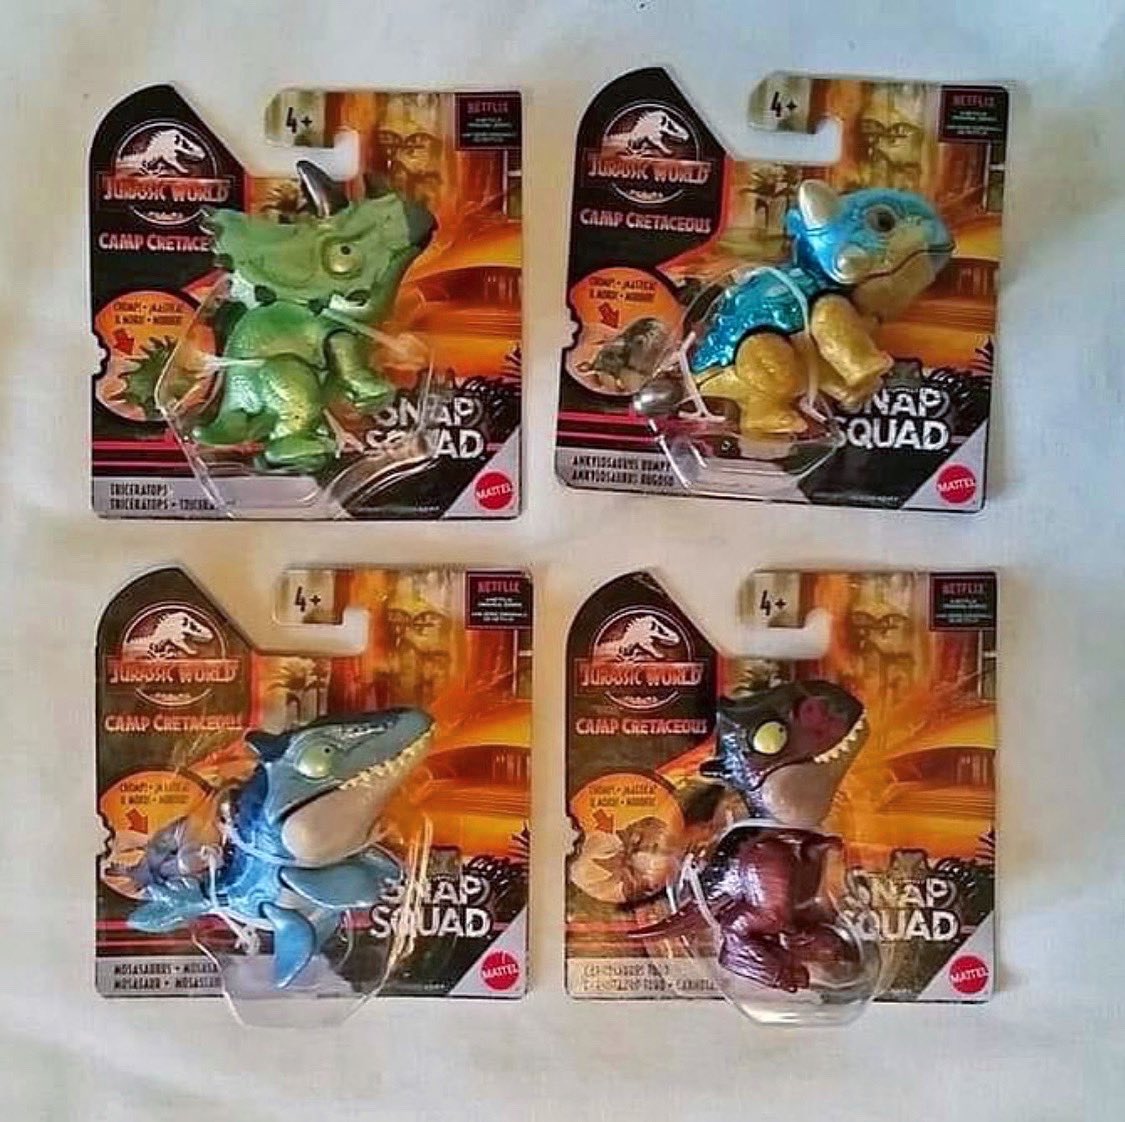 Collect Jurassic Ar Twitter More Camp Cretaceous Coming Out Of Australia All New Snap Squad Figures Of Triceratops And Bumpy The Ankylosaurus Join Metallic Repaints Of Mosasaurus And Carnotaurus In This Photo Posted